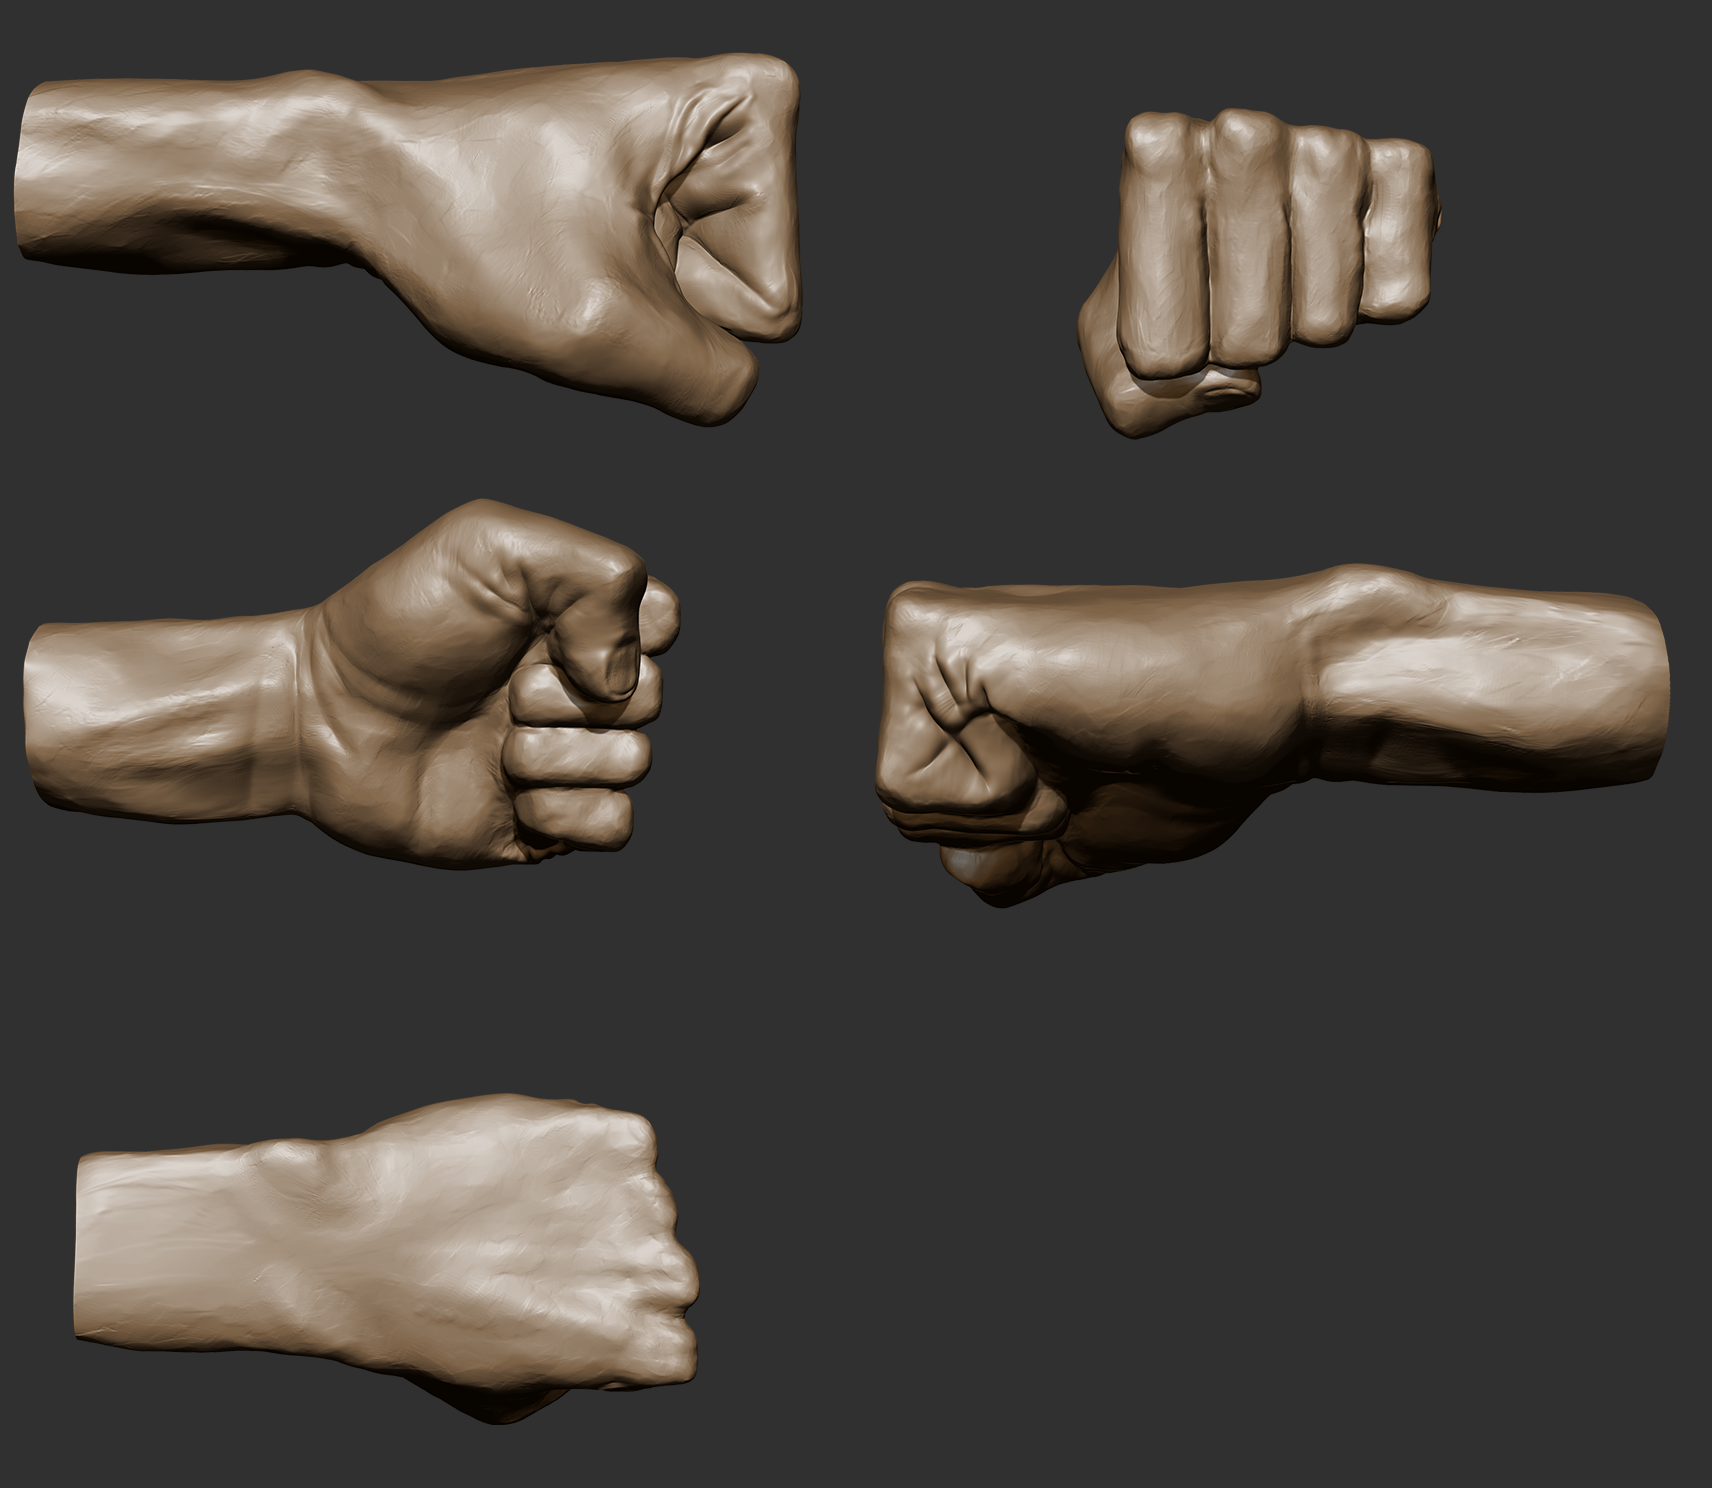 3D sculpted clenched fist from multiple points of view by Mariana Rios